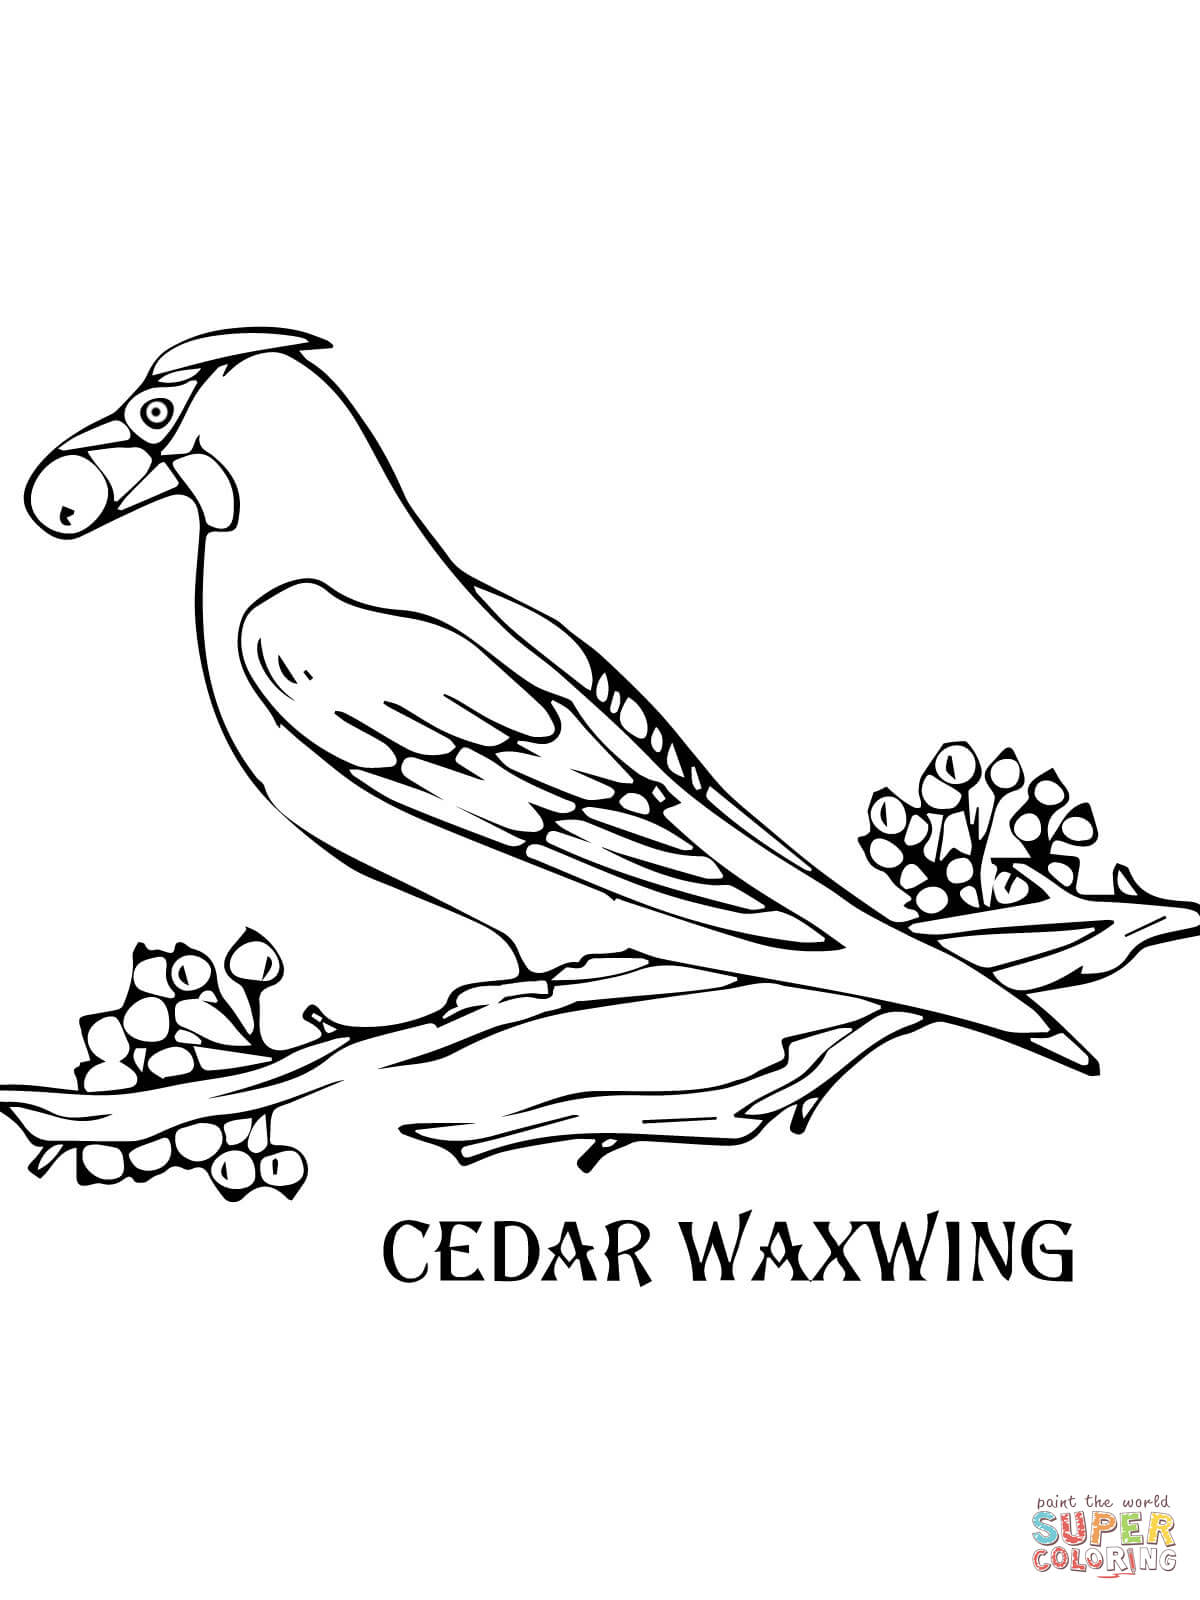 Waxwing coloring #17, Download drawings